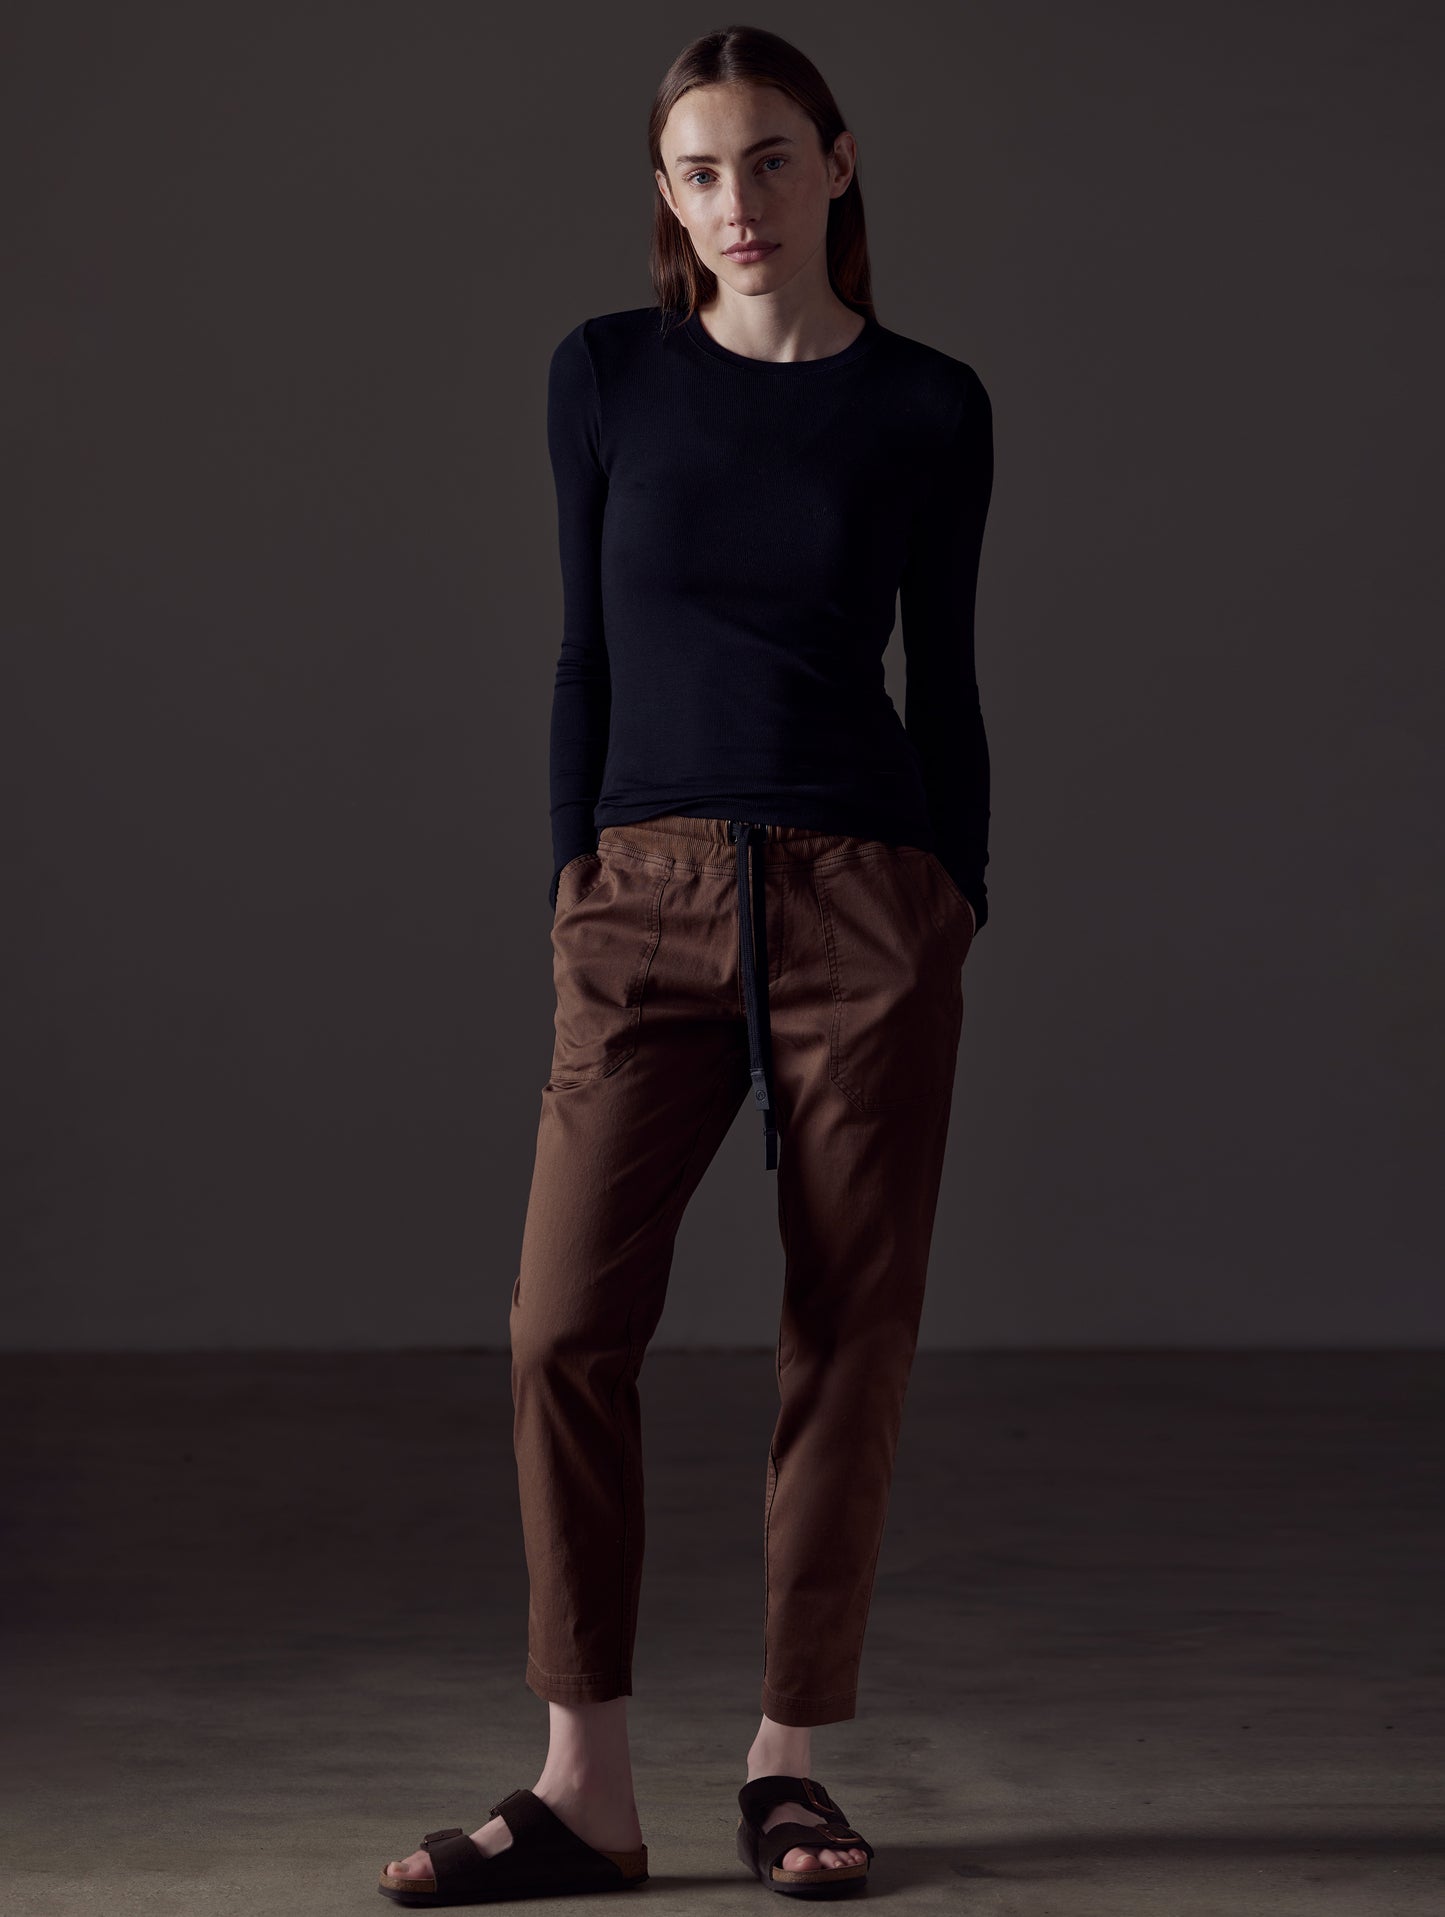 Woman wearing brown cotton pant from AETHER Apparel